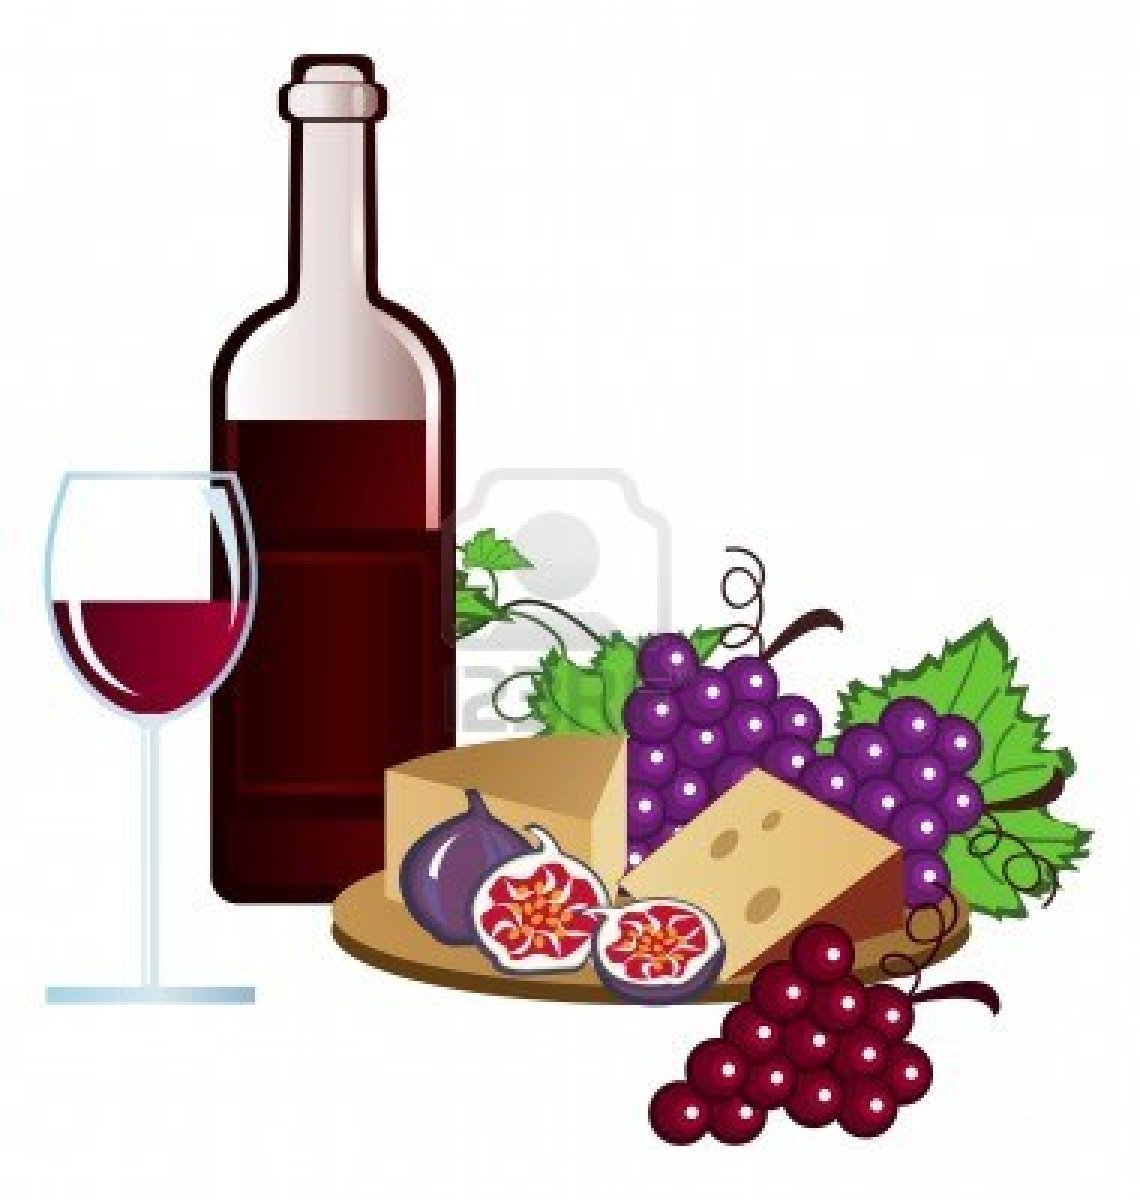 Wine And Cheese Clip Art View - Wine Tasting Clip Art